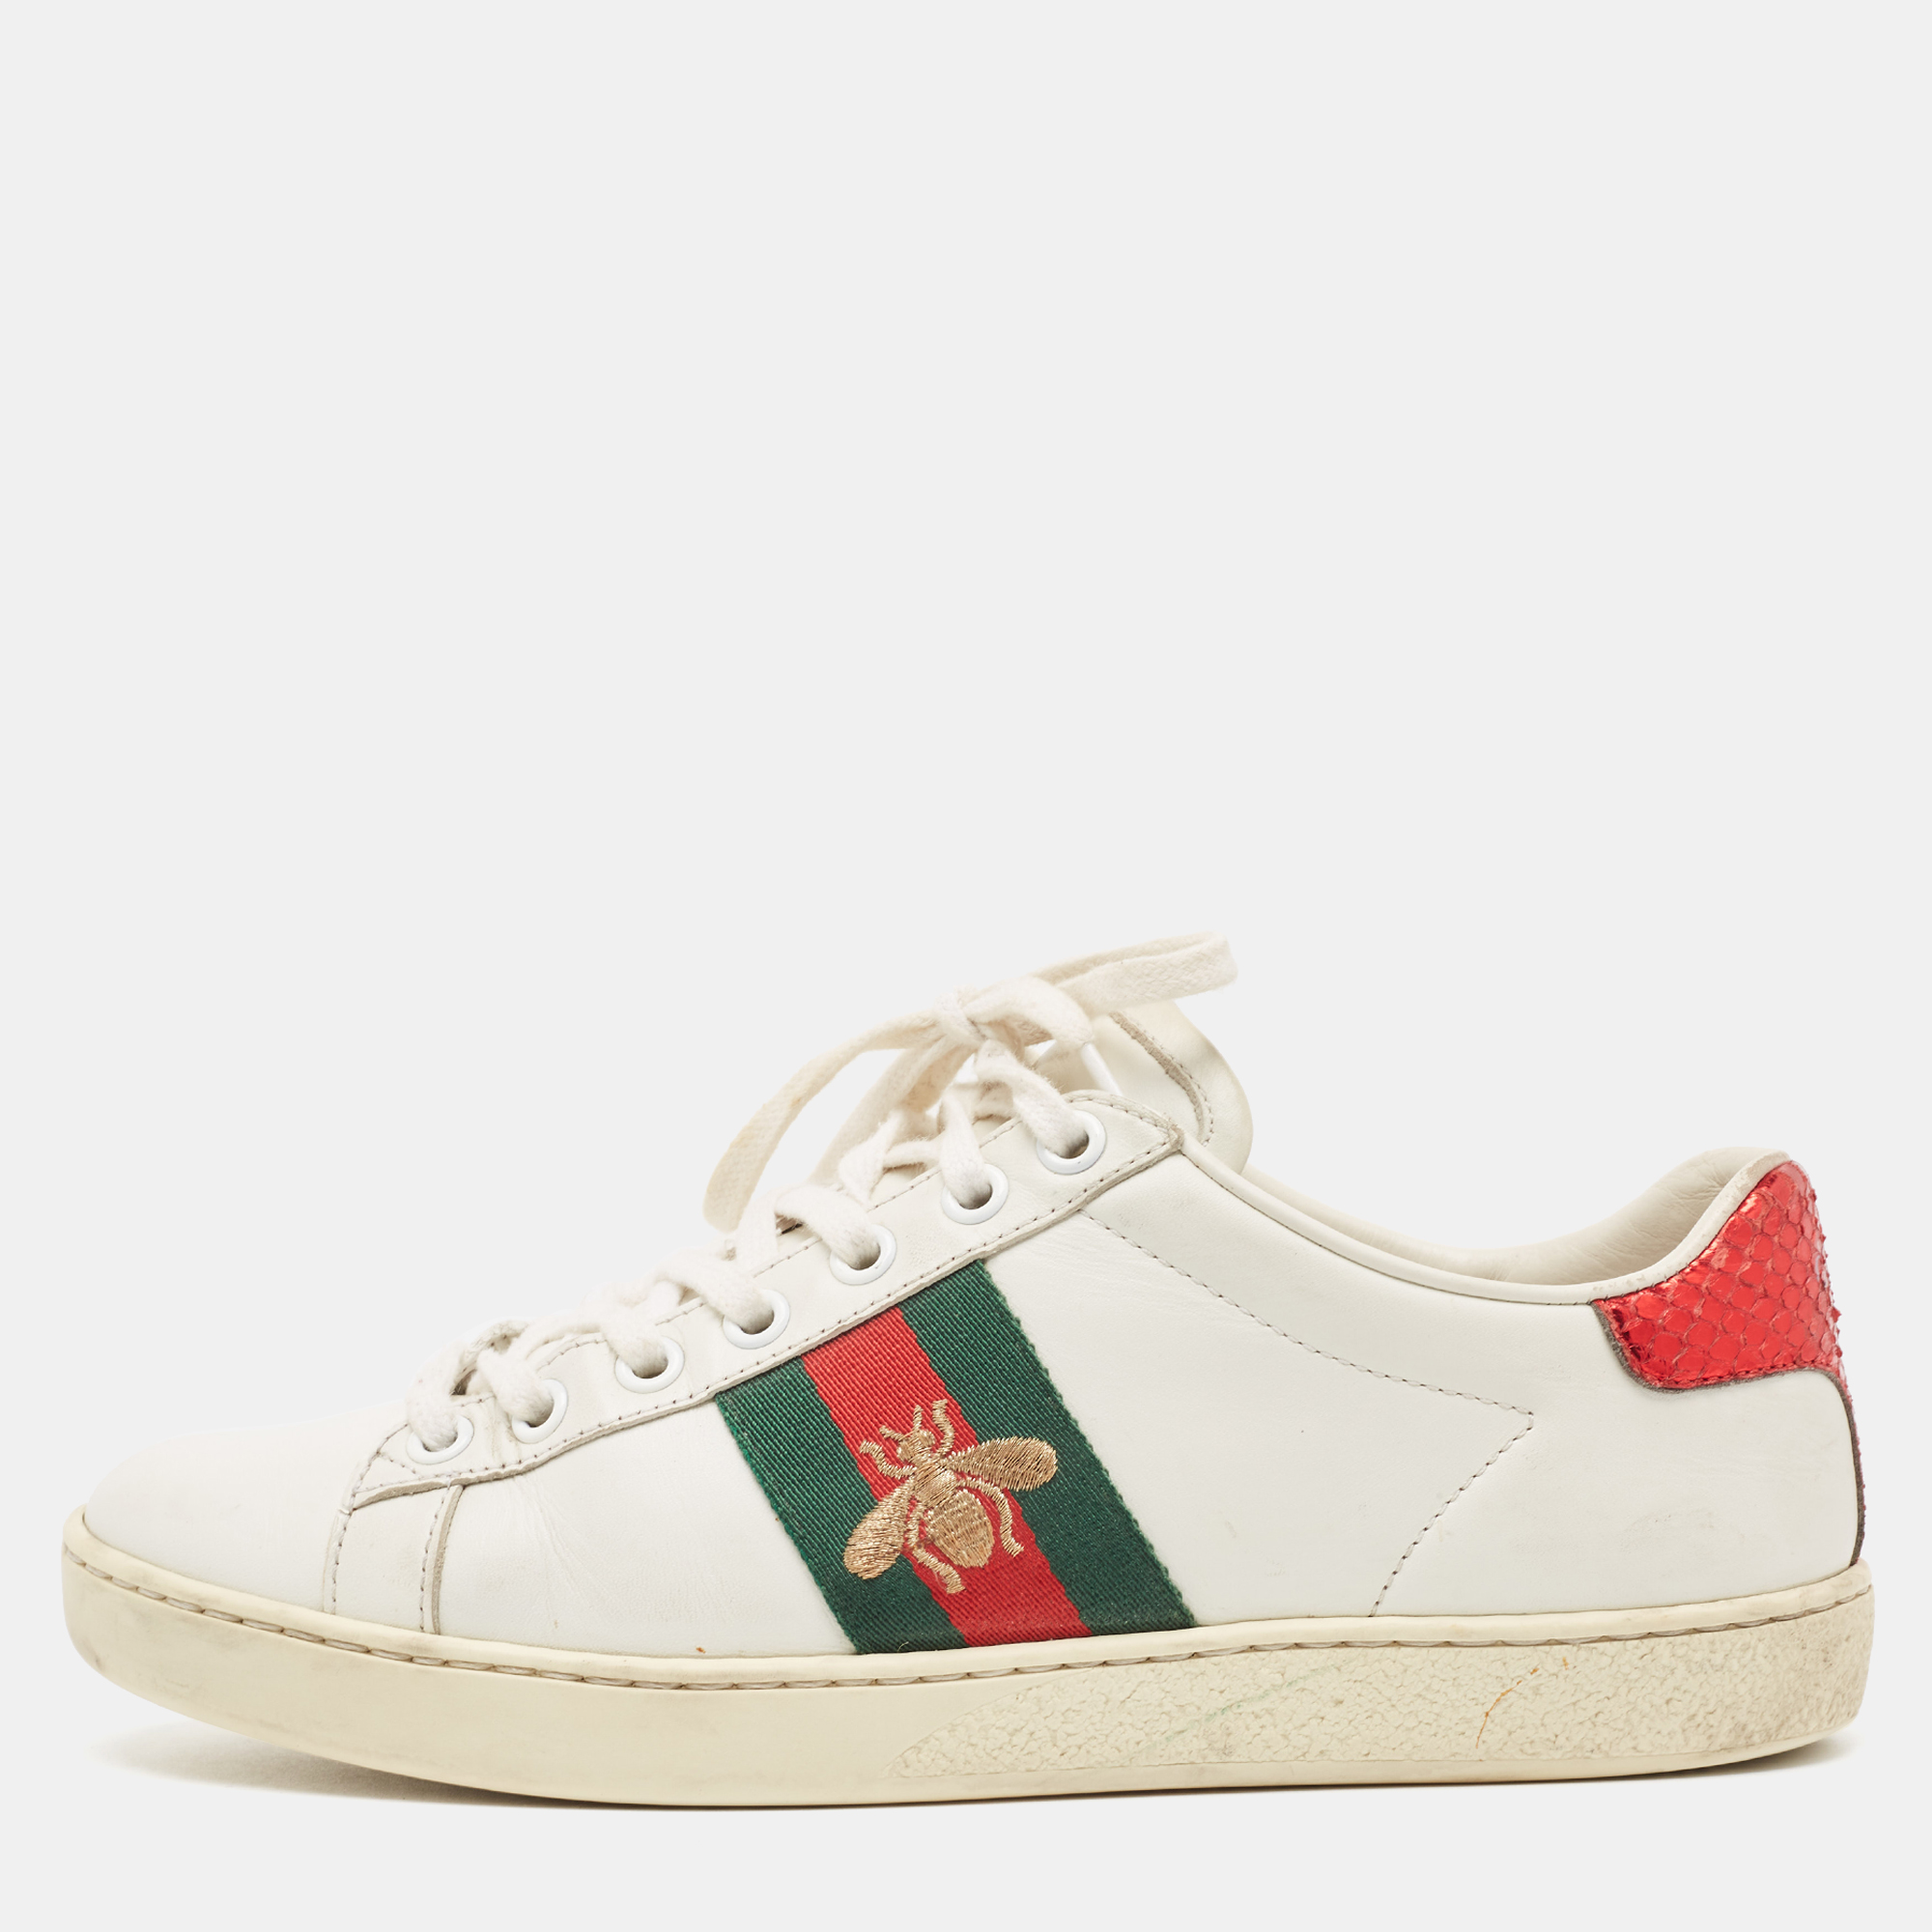 Gucci white leather ace low top sneakers size 36